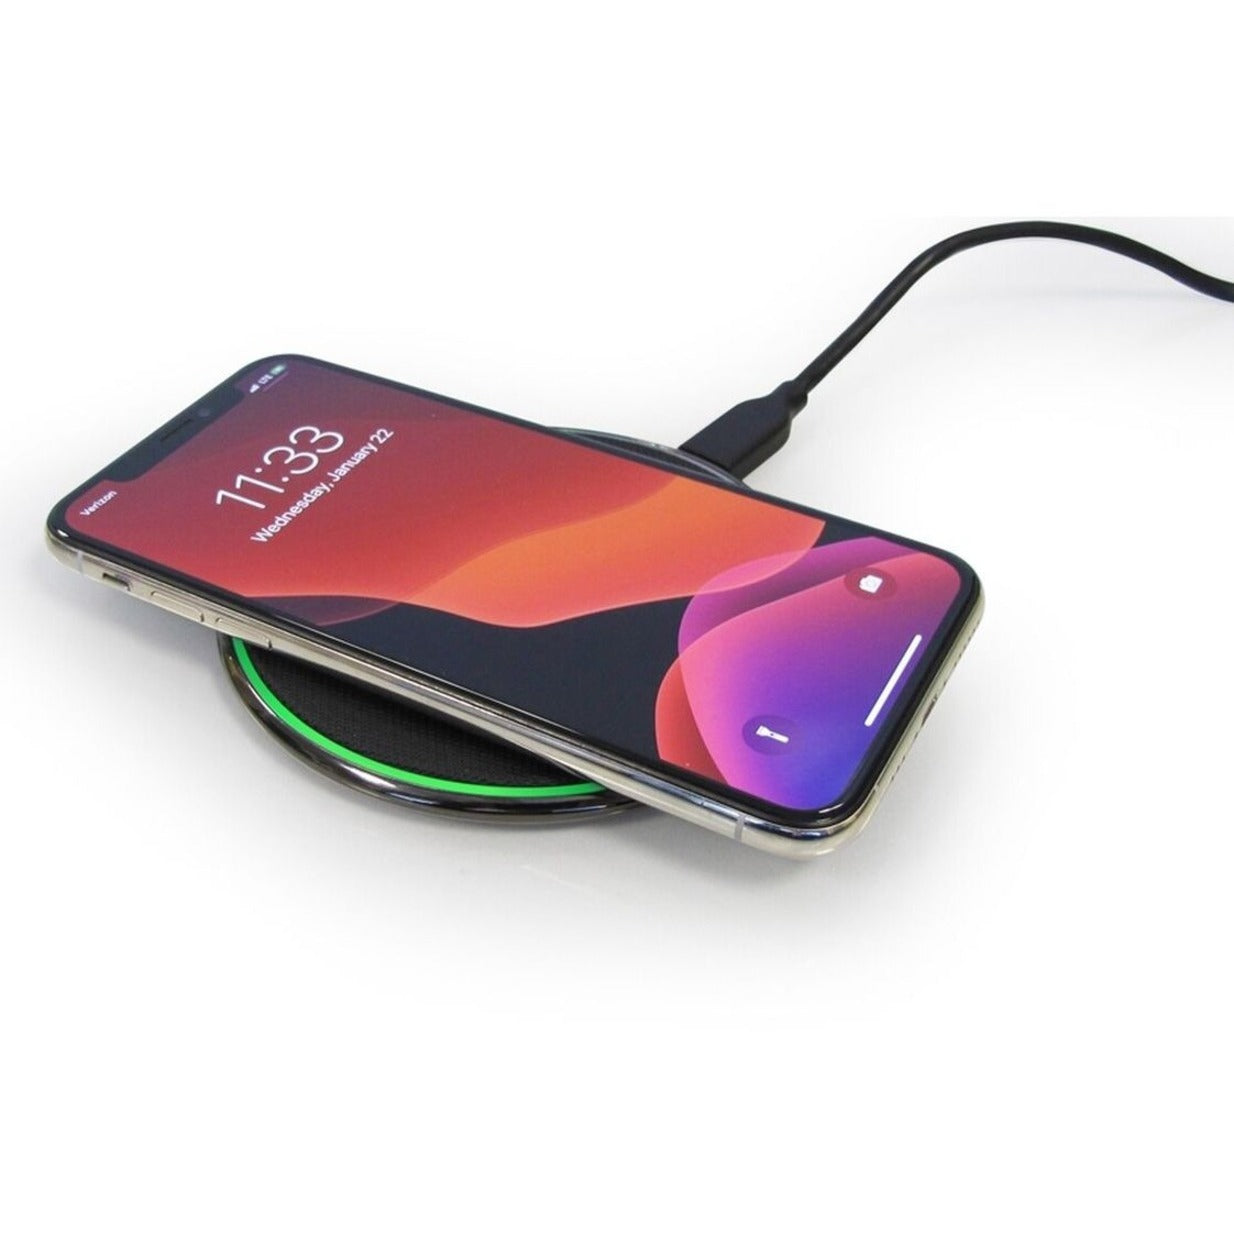 Comprehensive CPWR-QI100 Qi Certified Wireless Fast Charging Pad 10W, Compatible with All Qi Capable iPhone and Android Devices